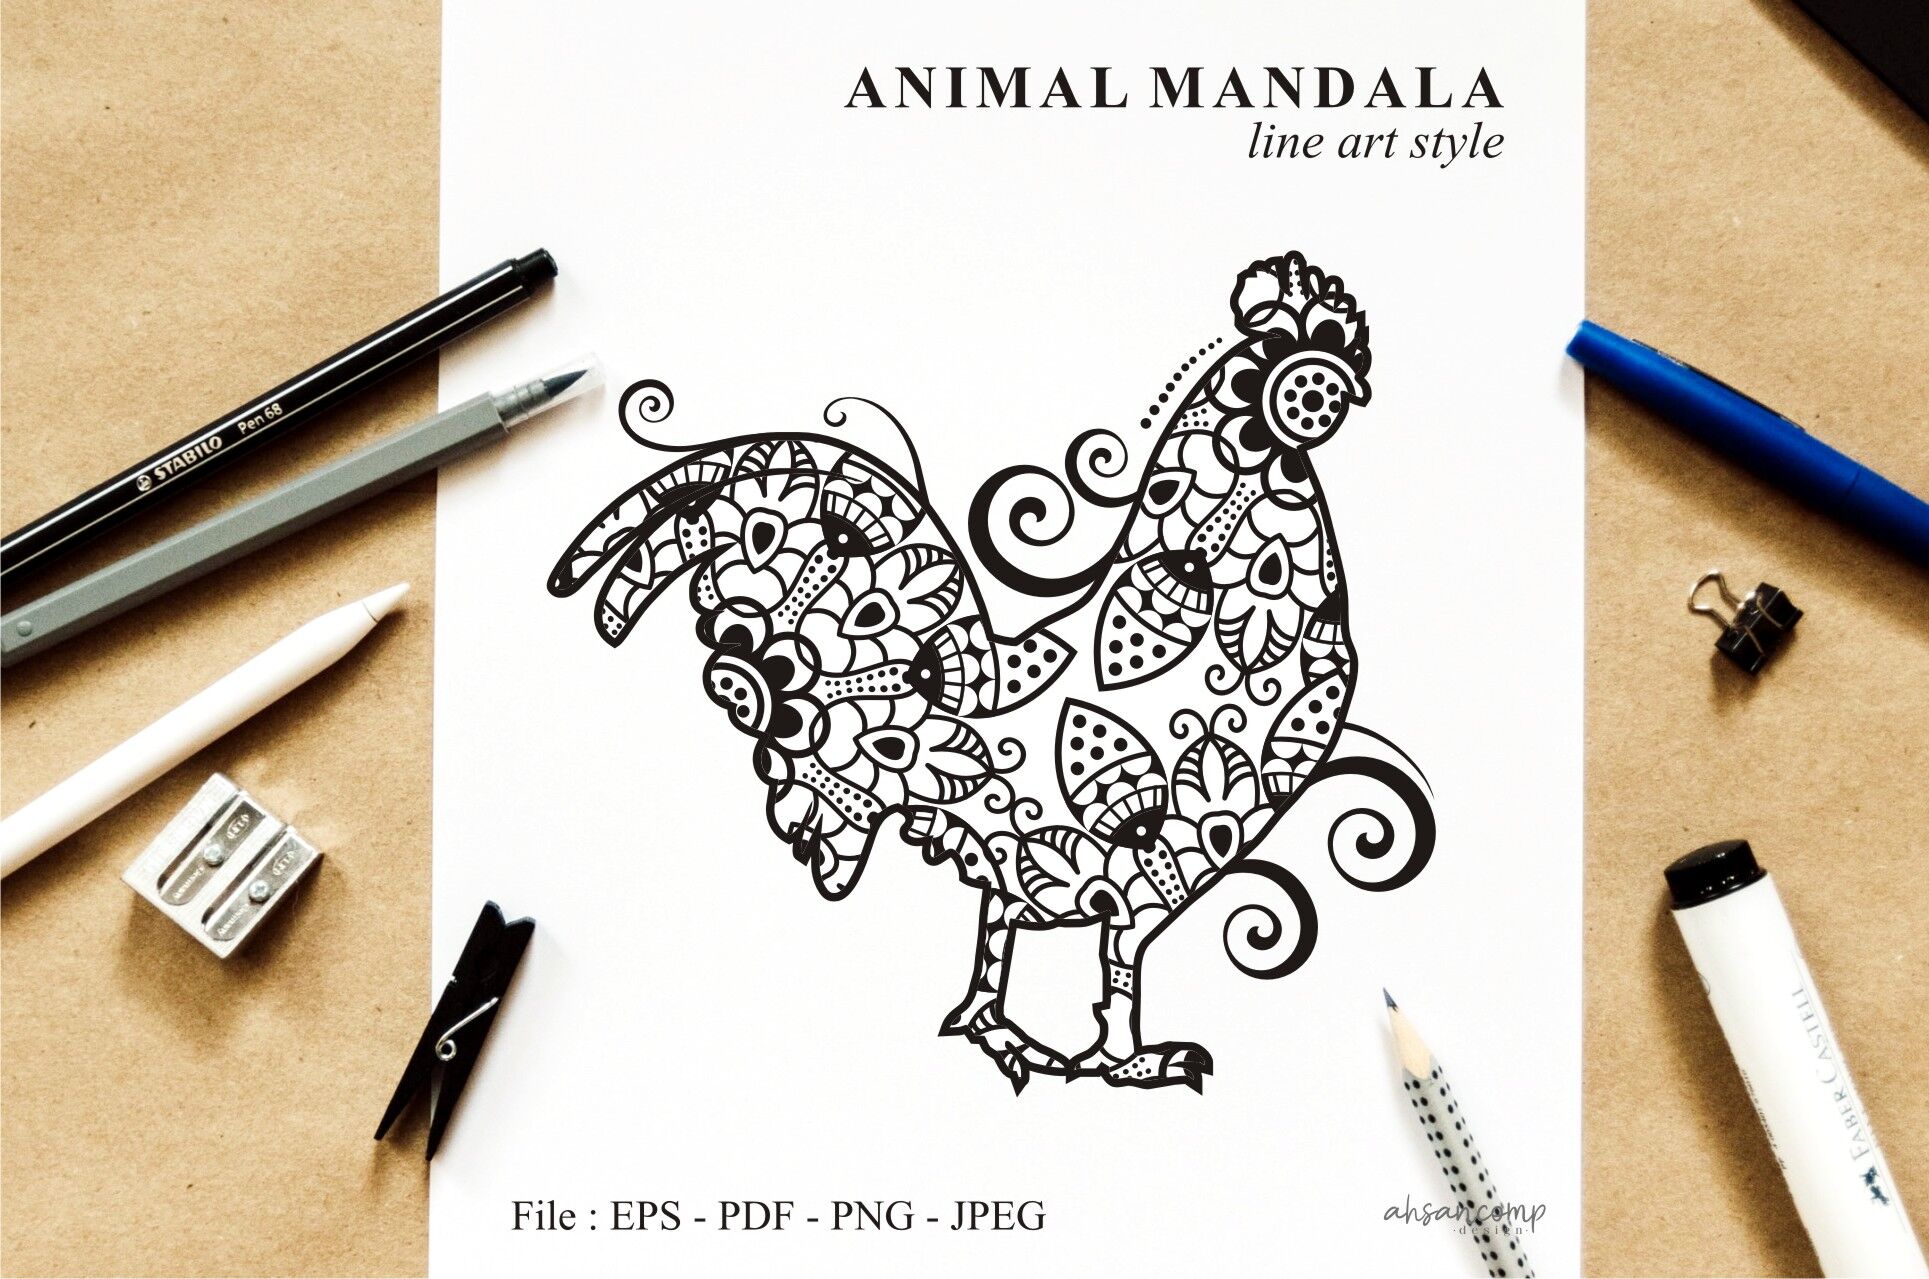 Download Rooster Mandala Vector Line Art Style 02 By Ahsancomp Studio Thehungryjpeg Com